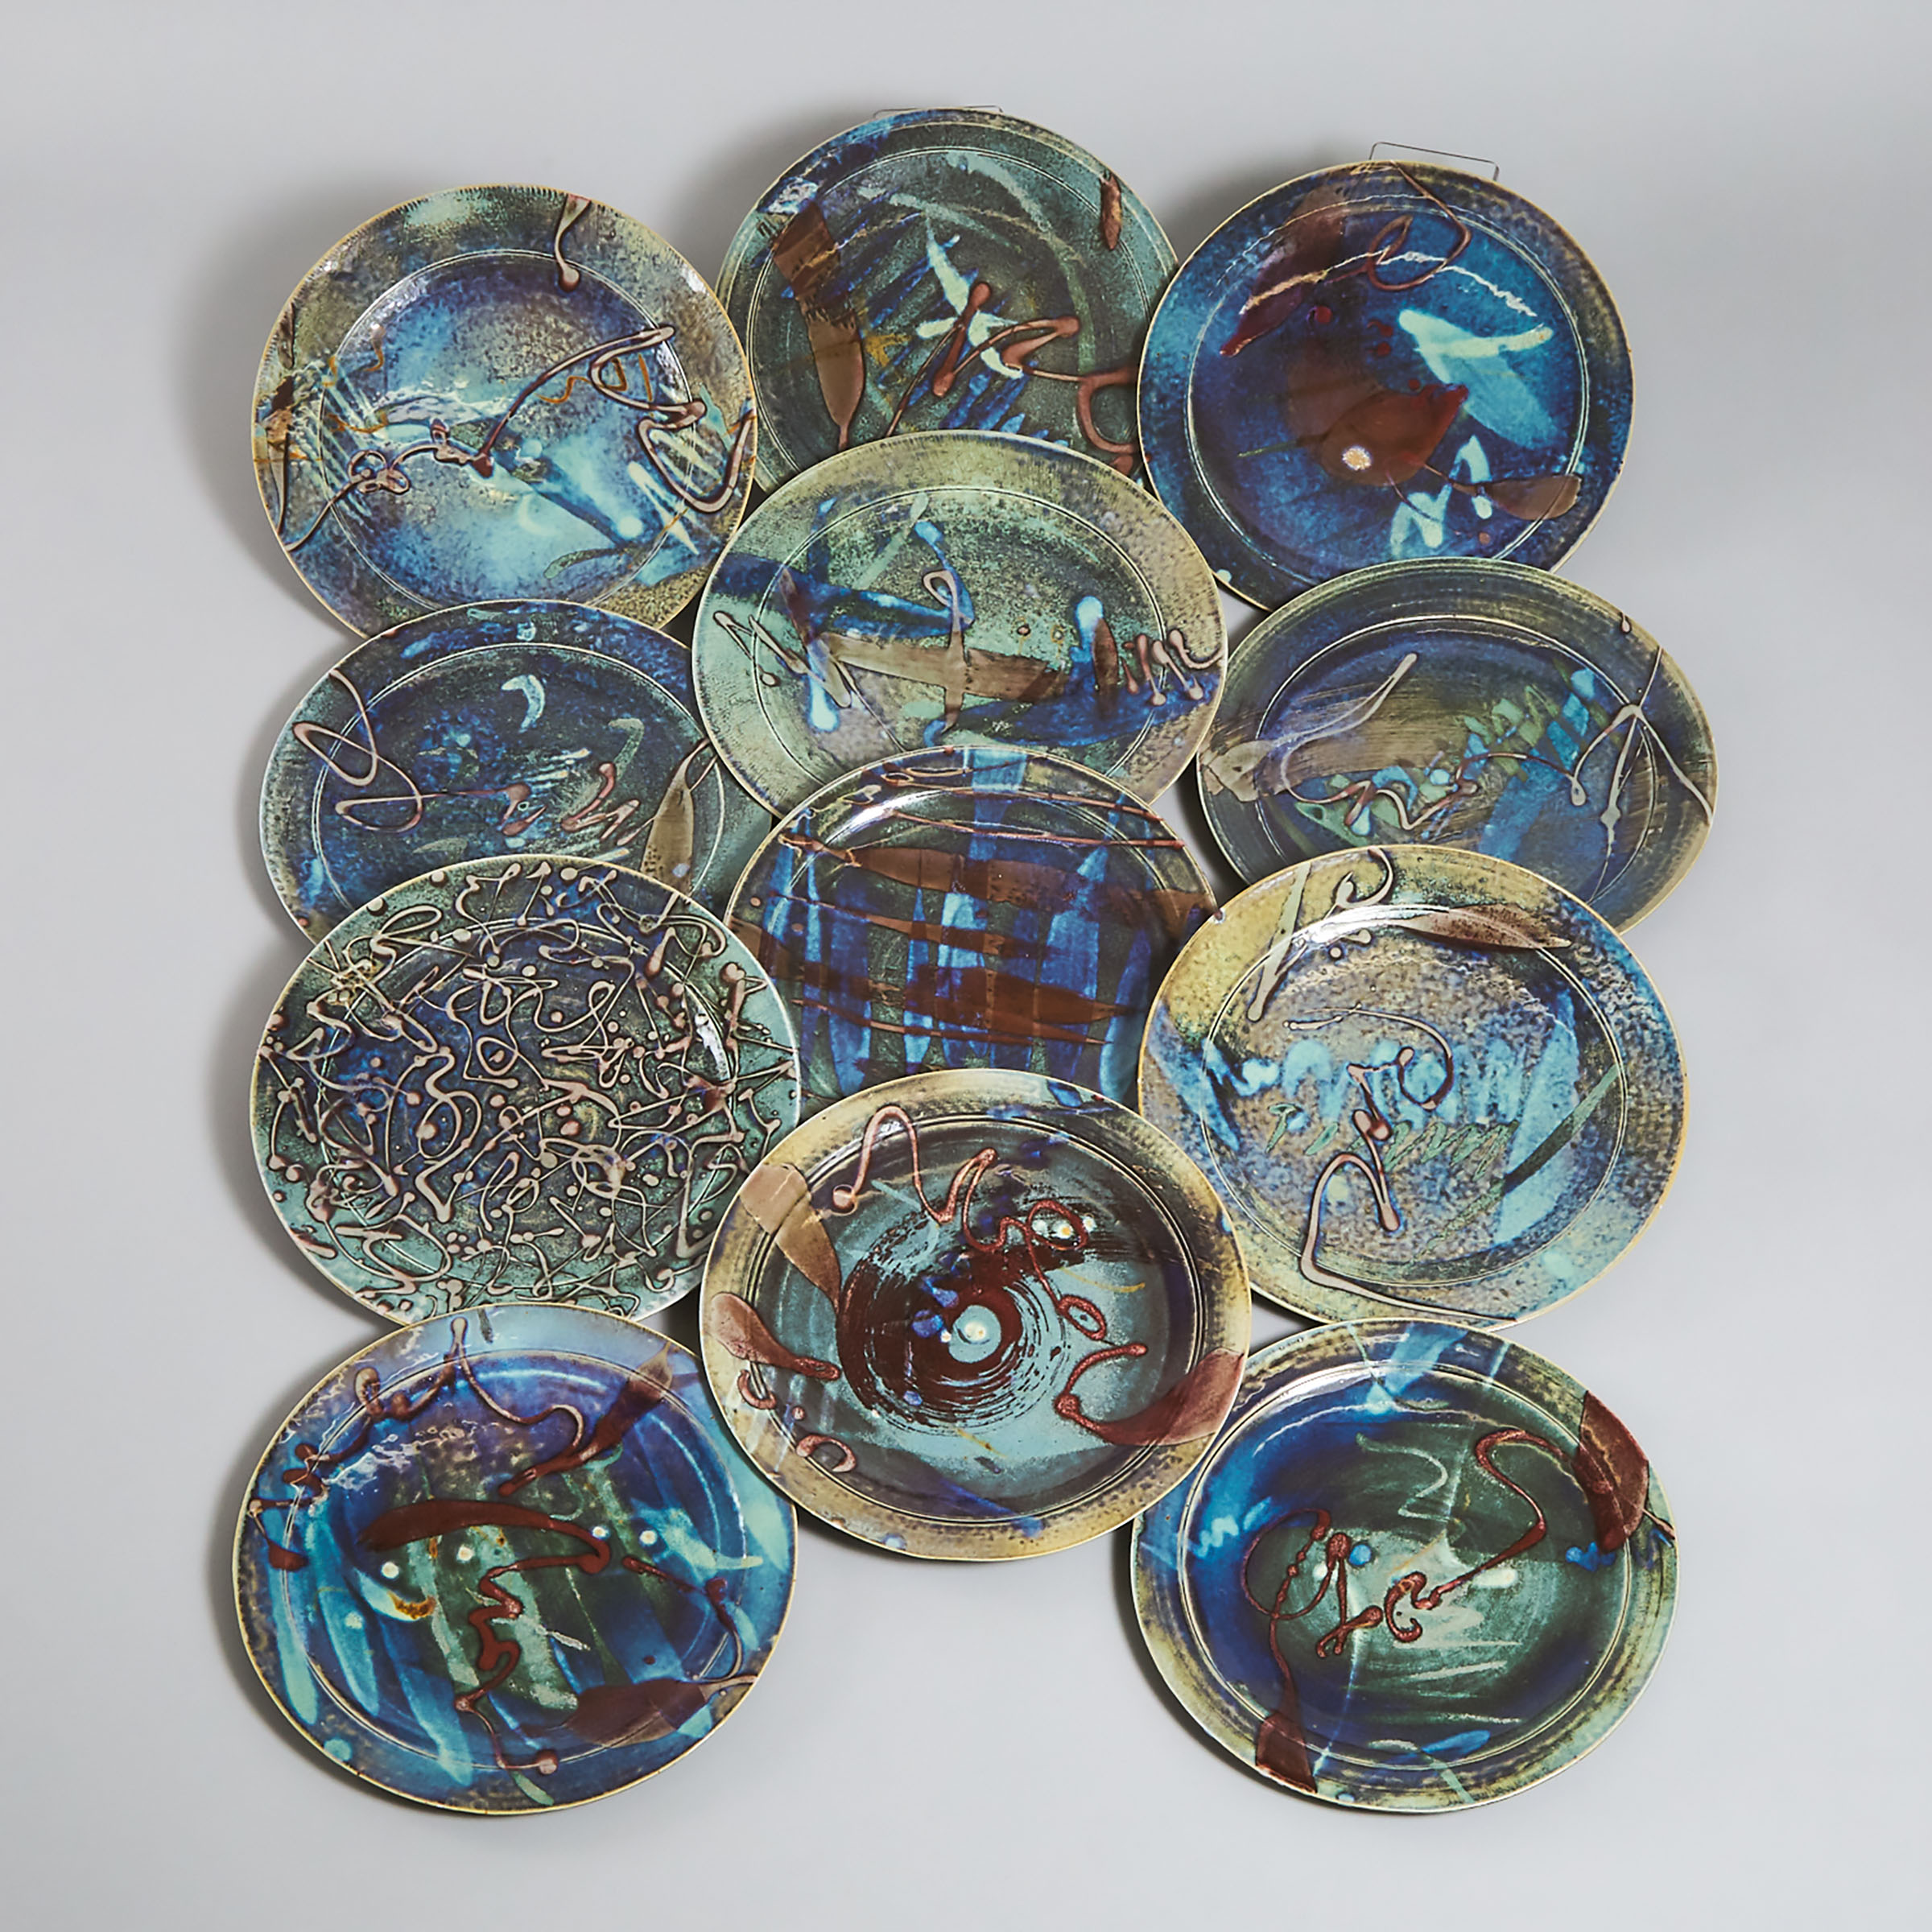 Kayo O'Young (Canadian, b.1950), Twelve Blue and Red Glazed Dinner Plates, 1989/90